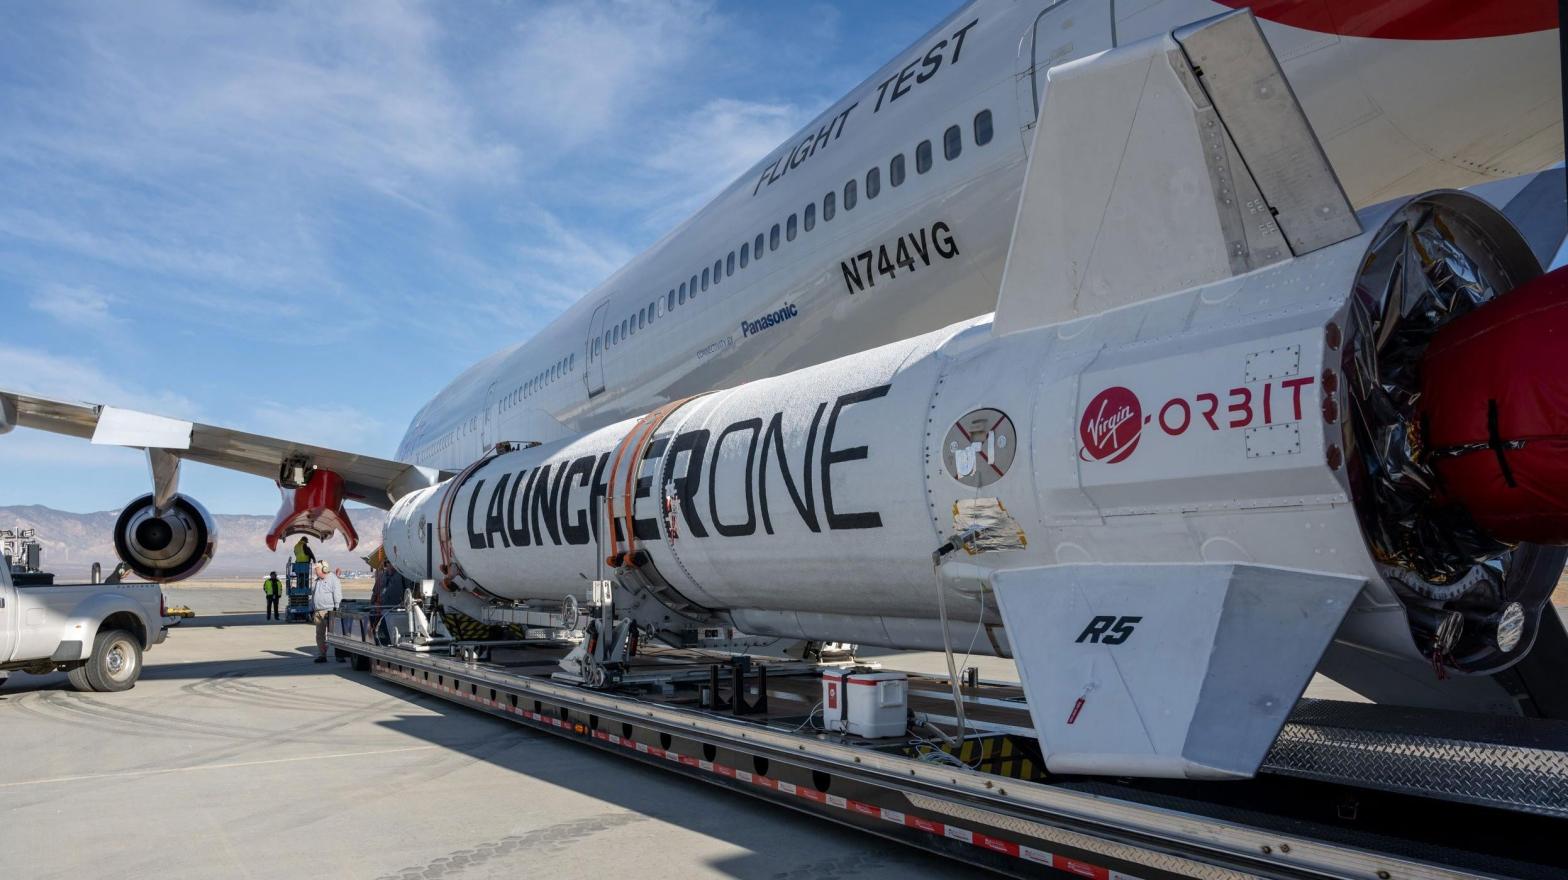 LauncherOne being loaded onto the carrier aircraft. (Photo: Virgin Orbit)